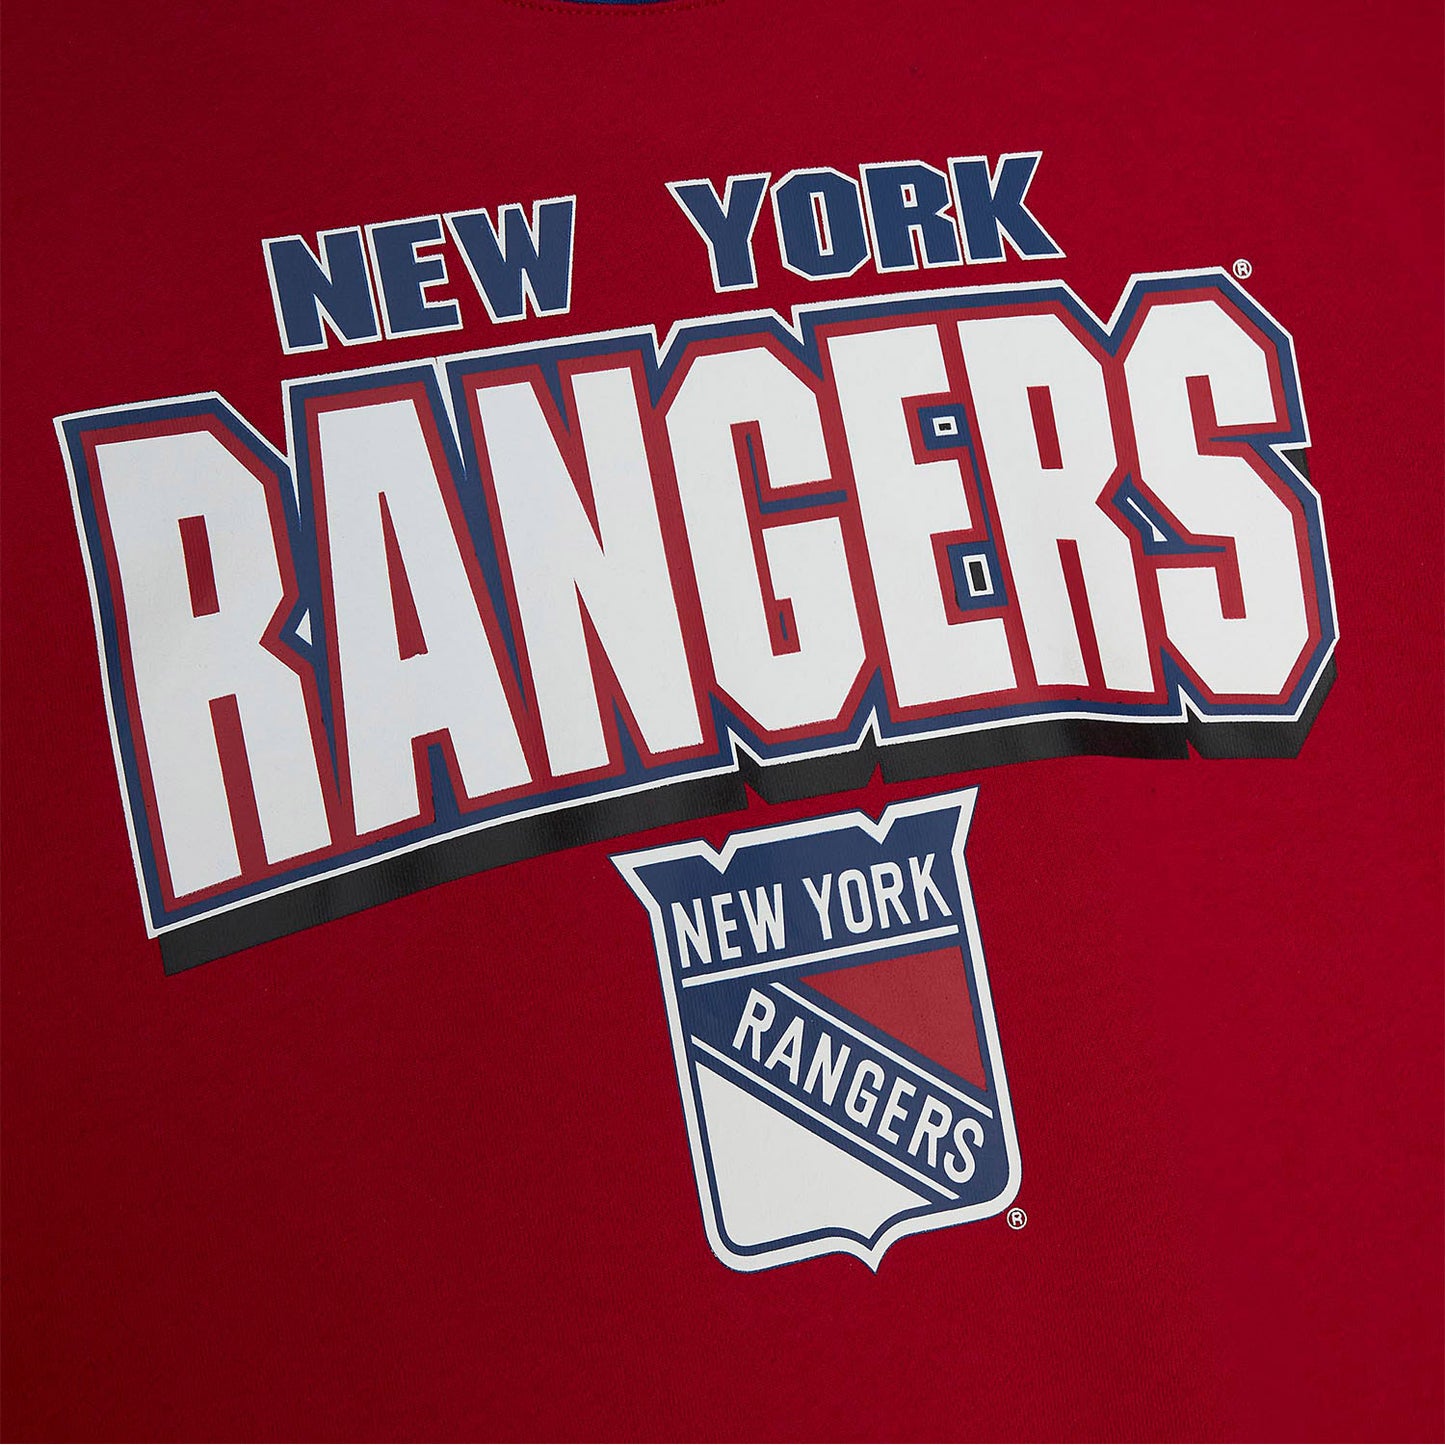 Mitchell & Ness Rangers All Over Crew Sweater In Red & Blue - Front View